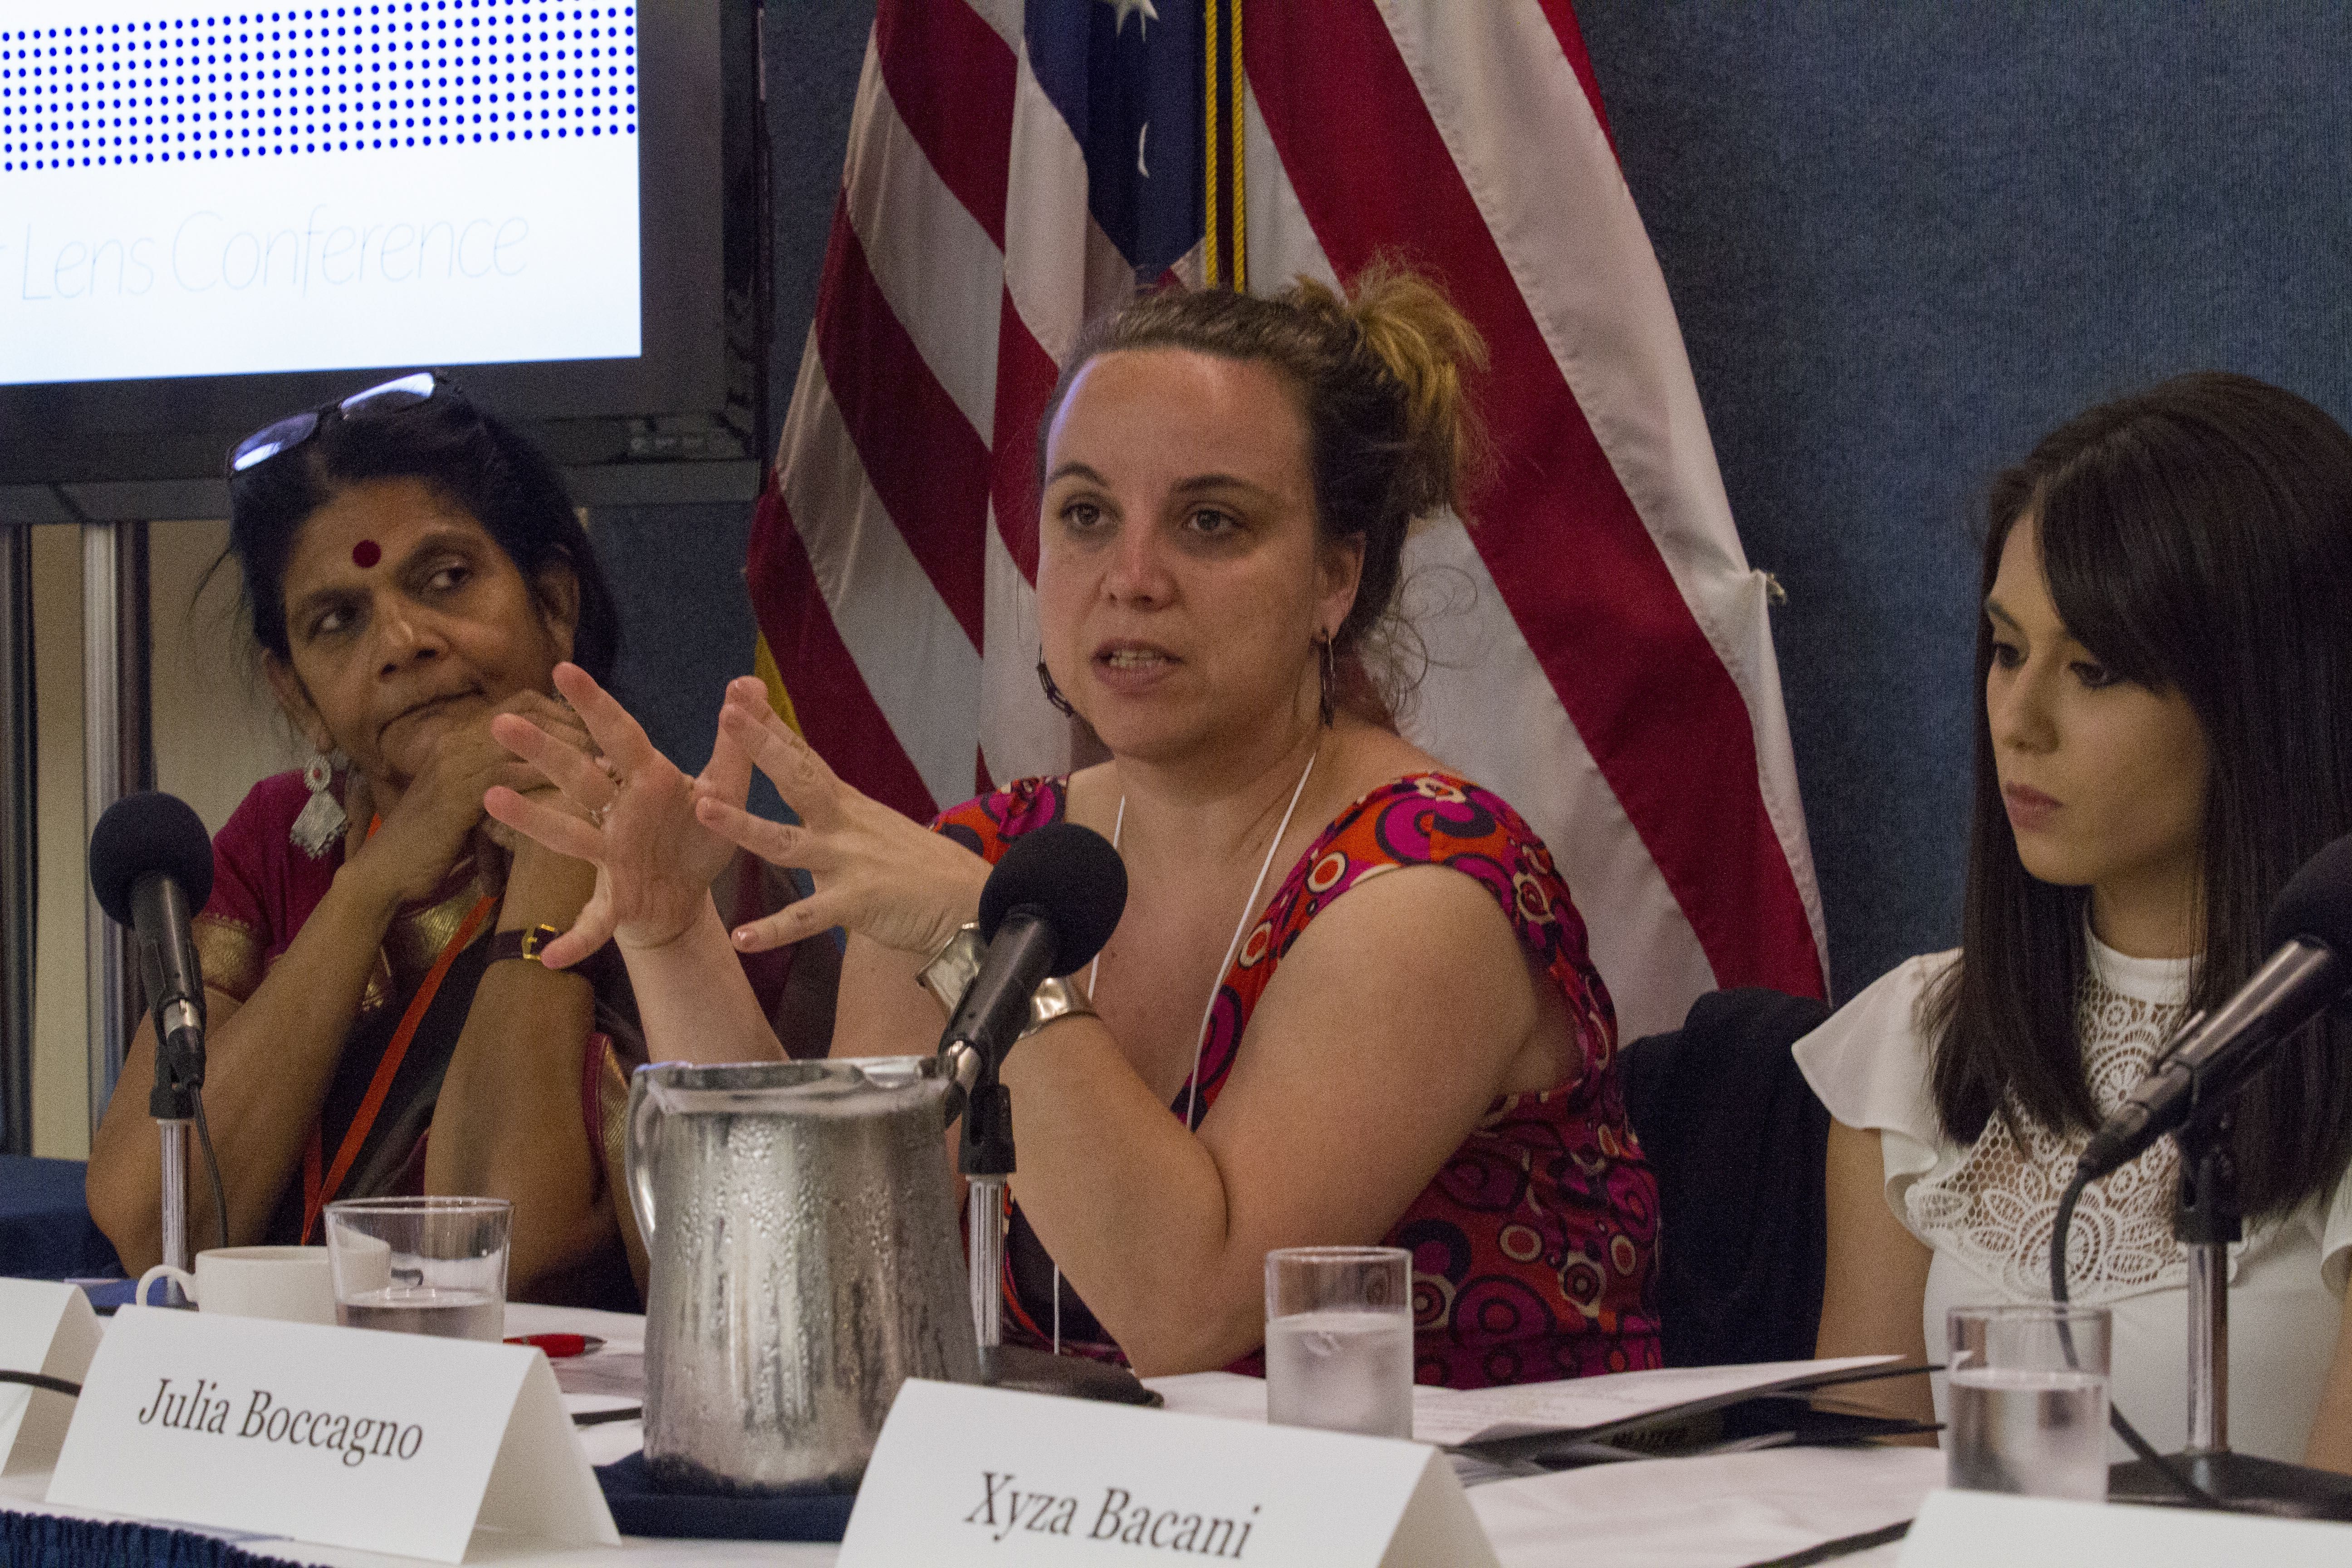 Panelists (from left to right) Chetna Gala Sinha, Jina Moore and Julia Boccagno focus on issues including labor migration, the status of transgender people in Thailand, and gender auditing in Rwanda during the panel on Labor & Economics at the Pulitzer Center Gender Lens Conference. Image by Jin Ding. United States, 2017.